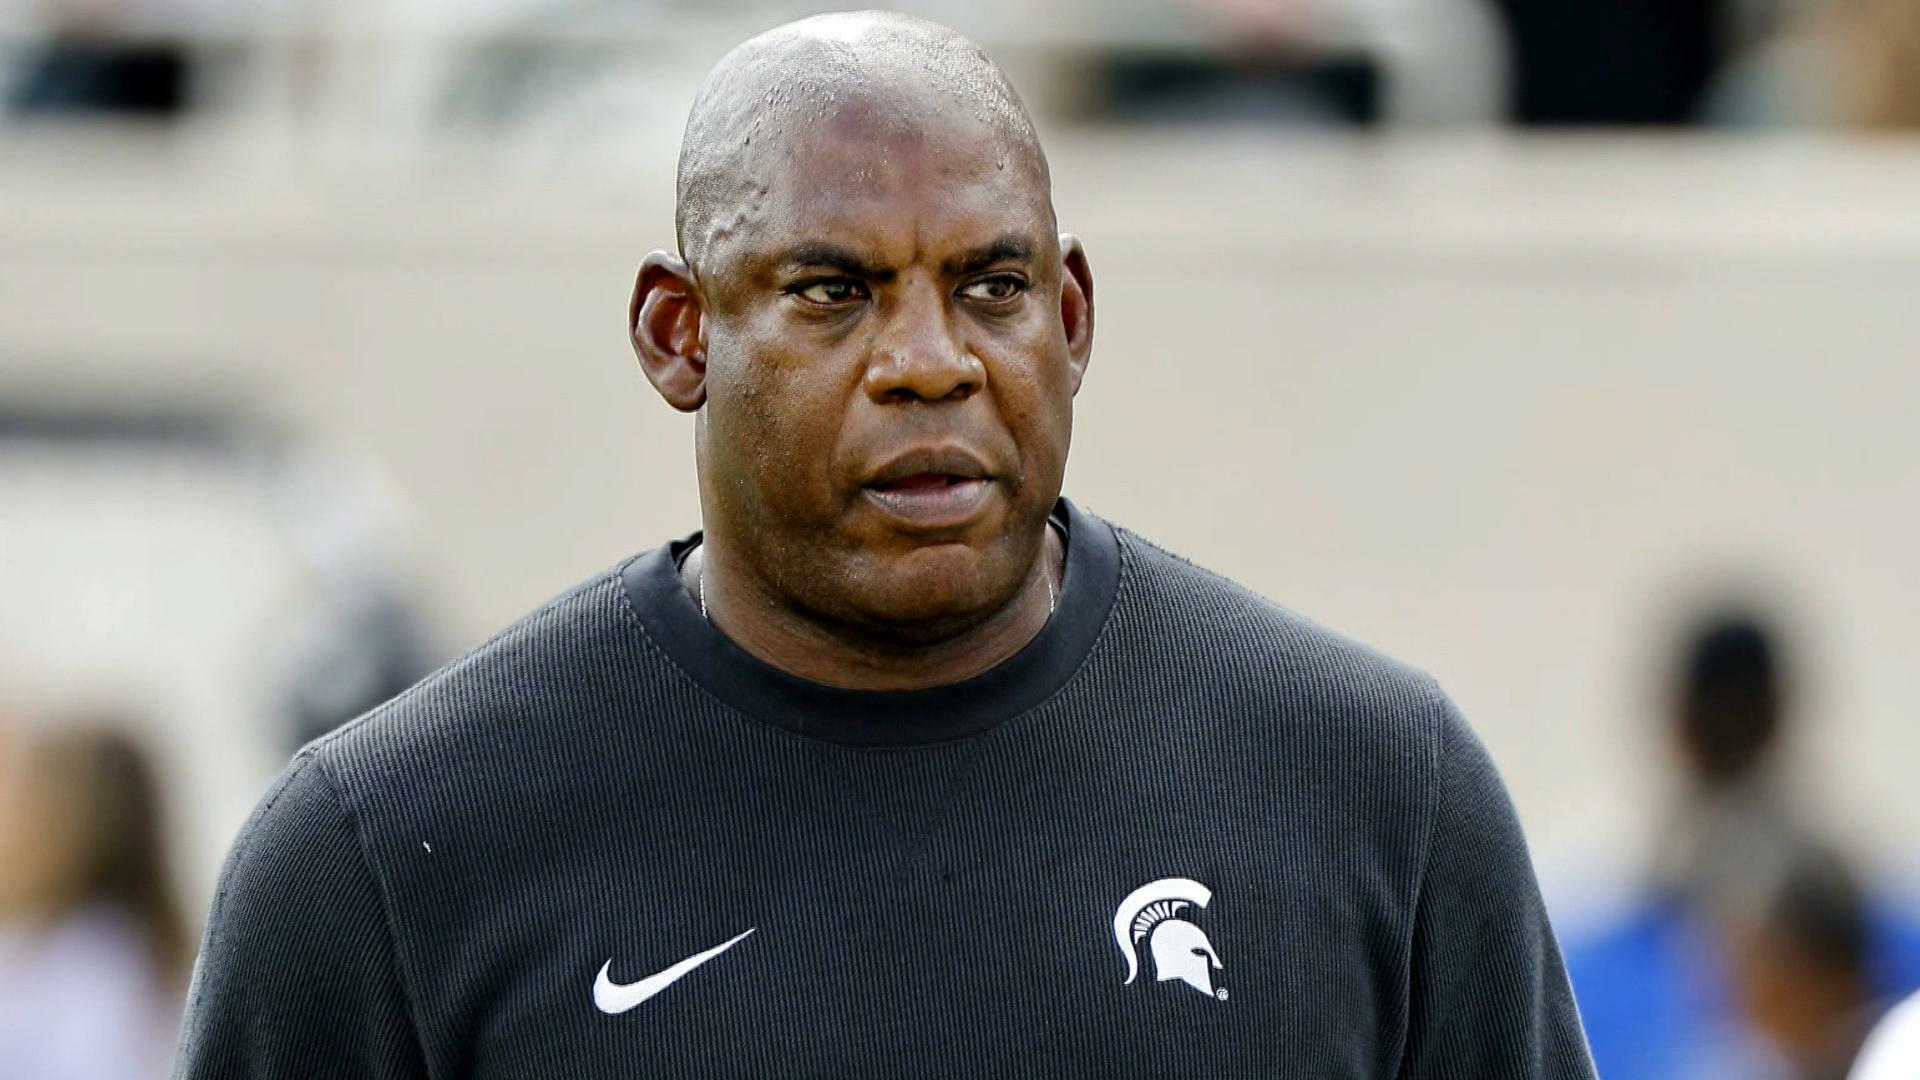 Watch CBS Mornings: MSU coach suspended after harassment claims - Full ...